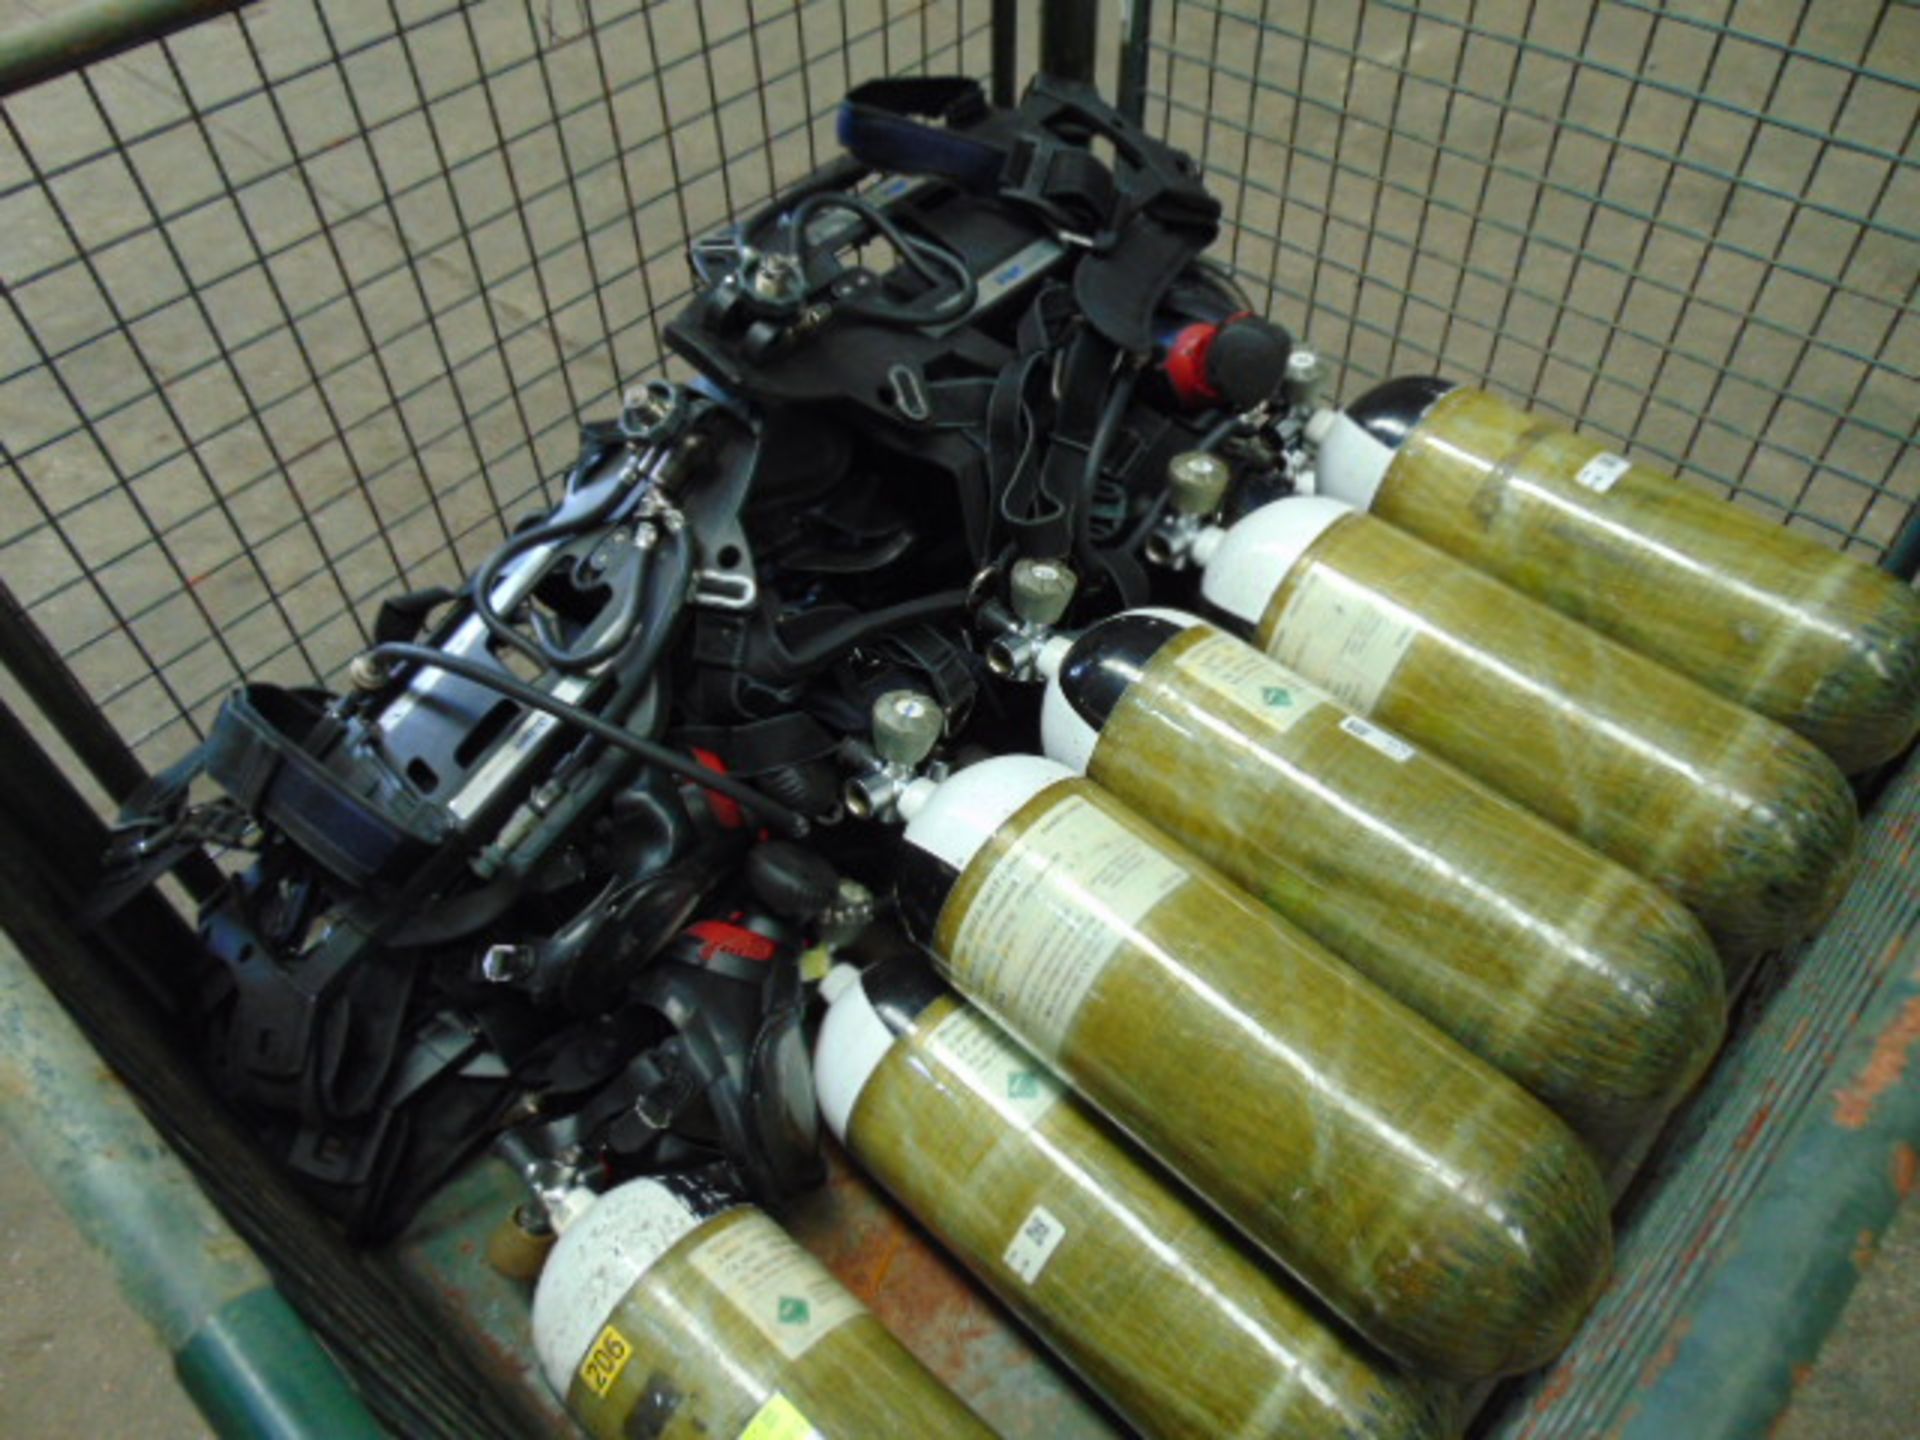 5 x Drager PSS 7000 Self Contained Breathing Apparatus w/ 10 x Drager 300 Bar Air Cylinders - Image 25 of 27